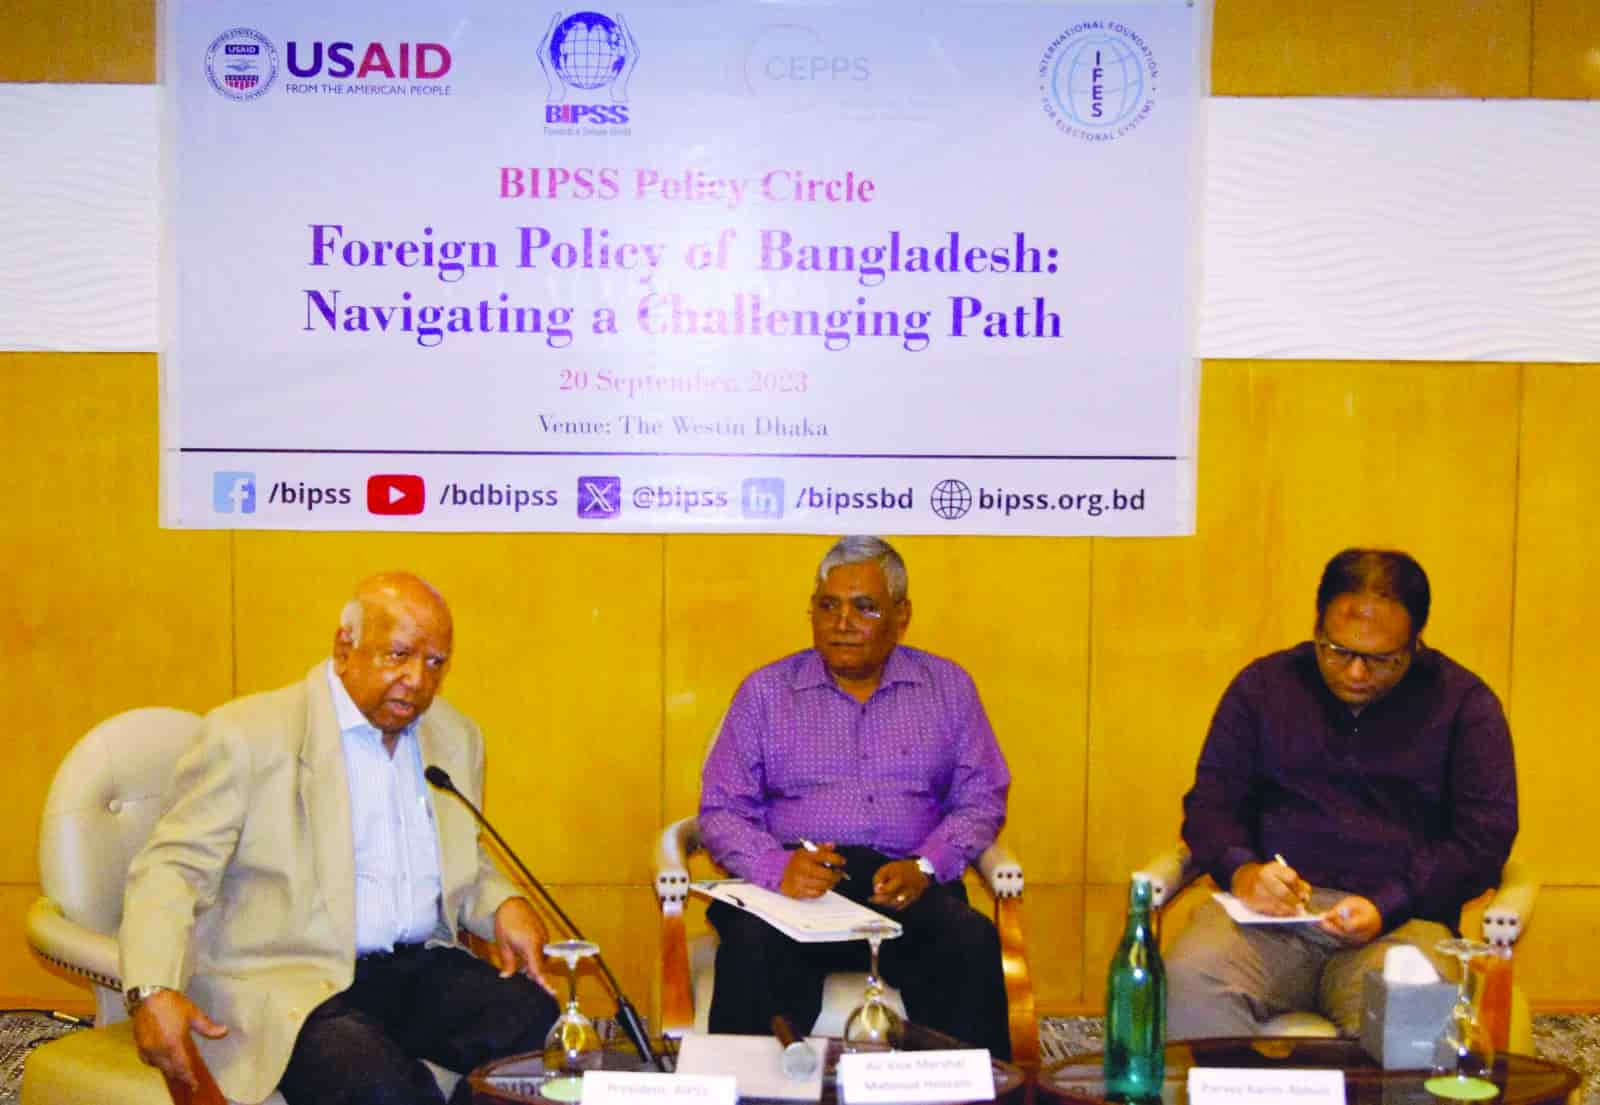 Foreign Policy of Bangladesh: Navigating a Challenging Path